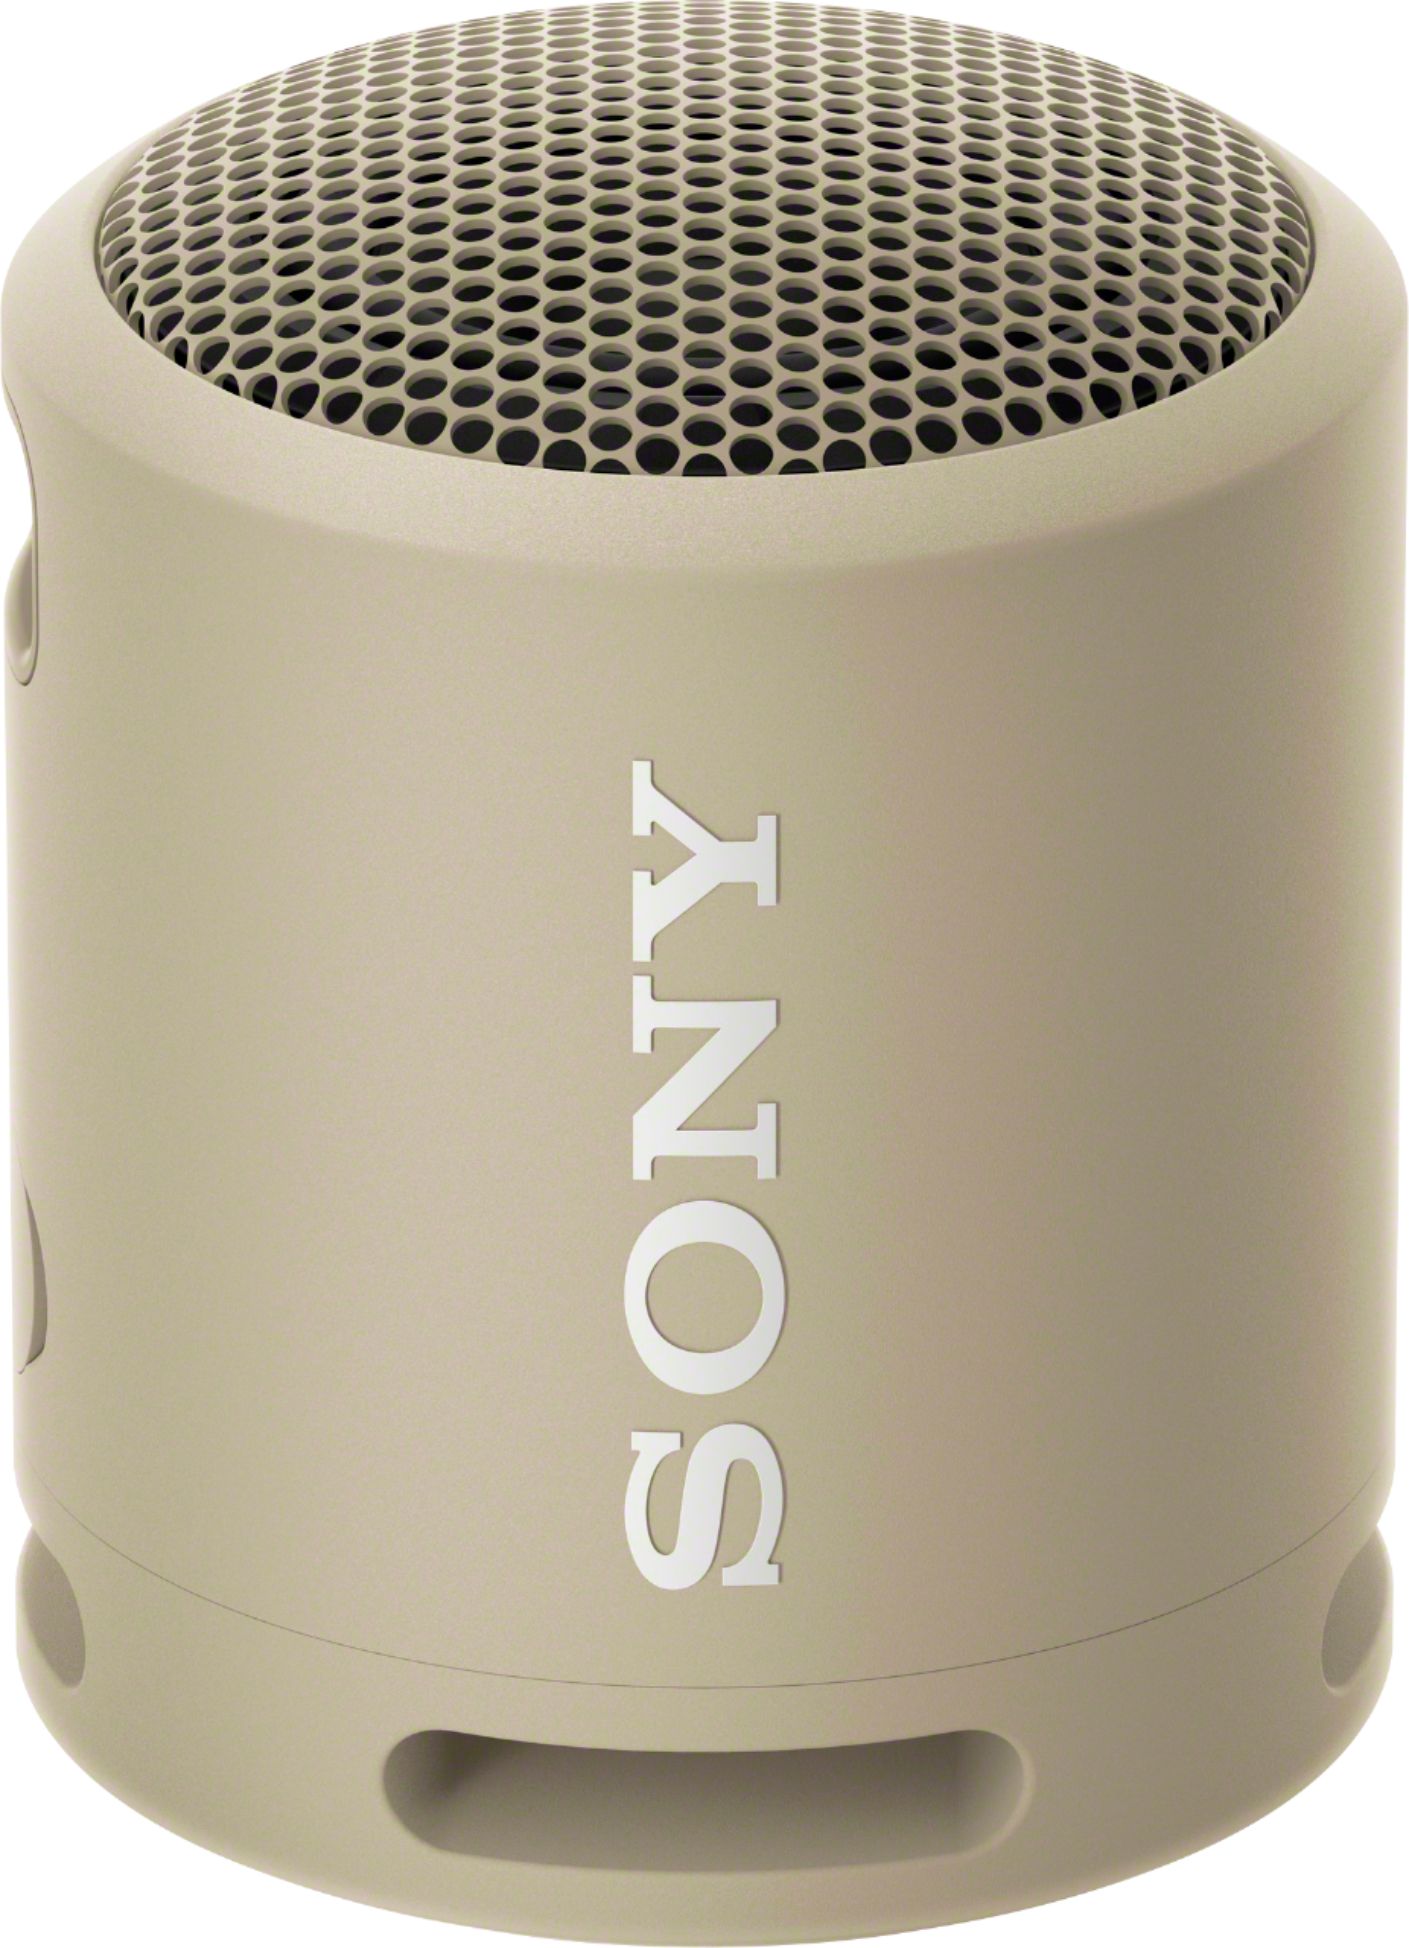 Best Buy: Compact Taupe BASS Speaker EXTRA Portable Sony Bluetooth SRSXB13/C